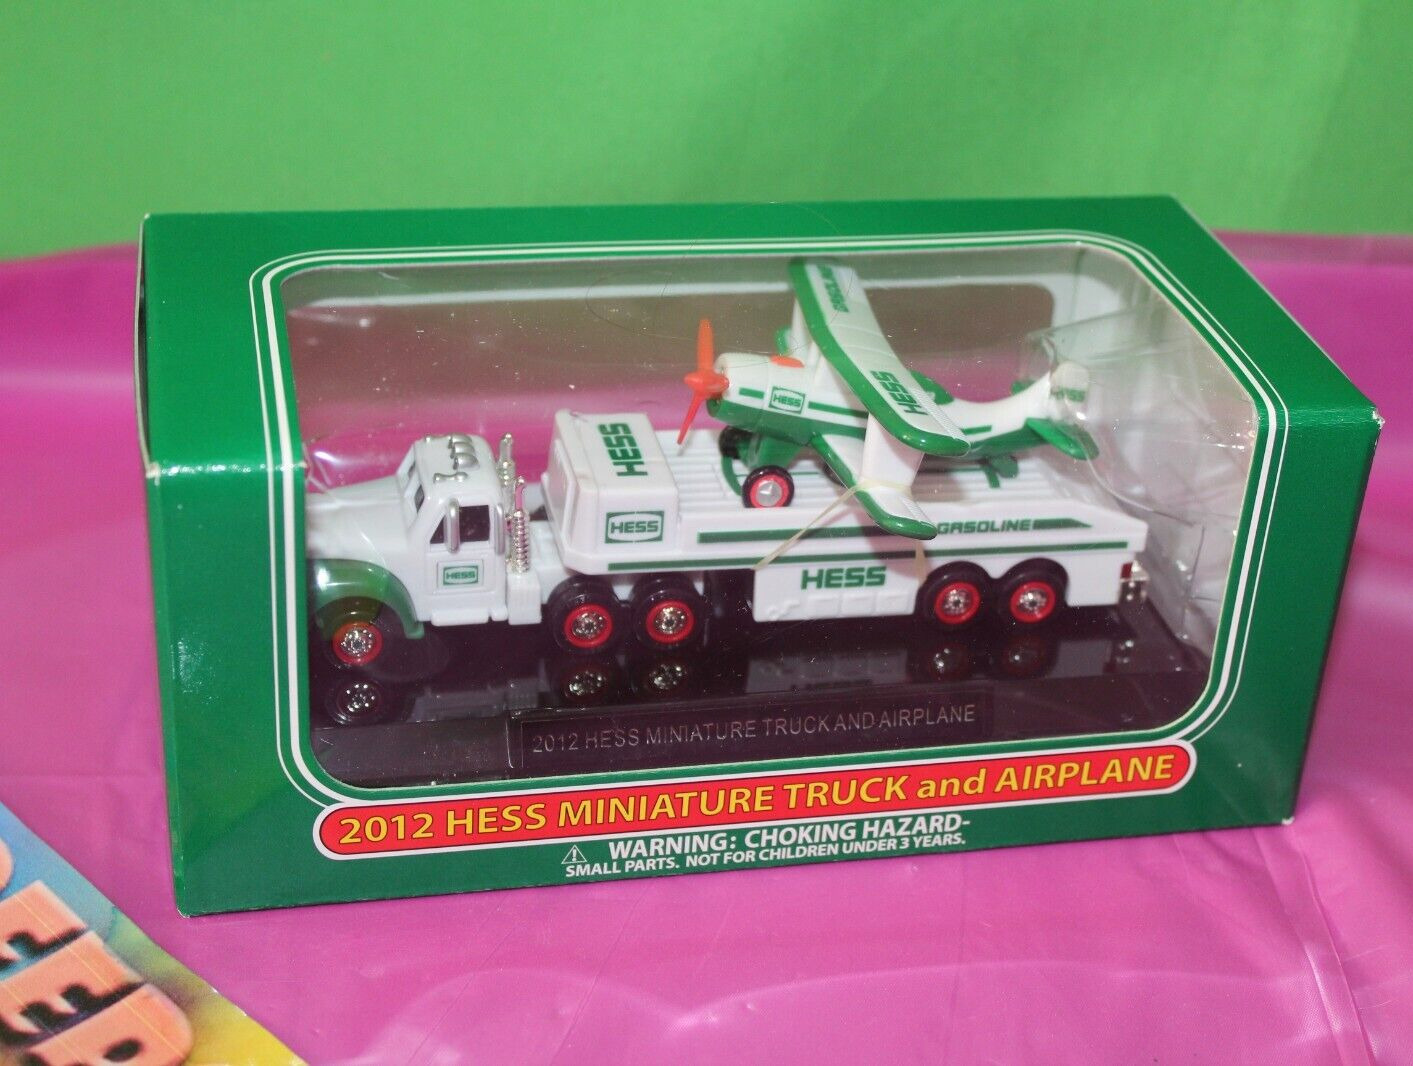 Hess 2012 Miniature Truck And Airplane Toy Set Holiday Christmas Gift